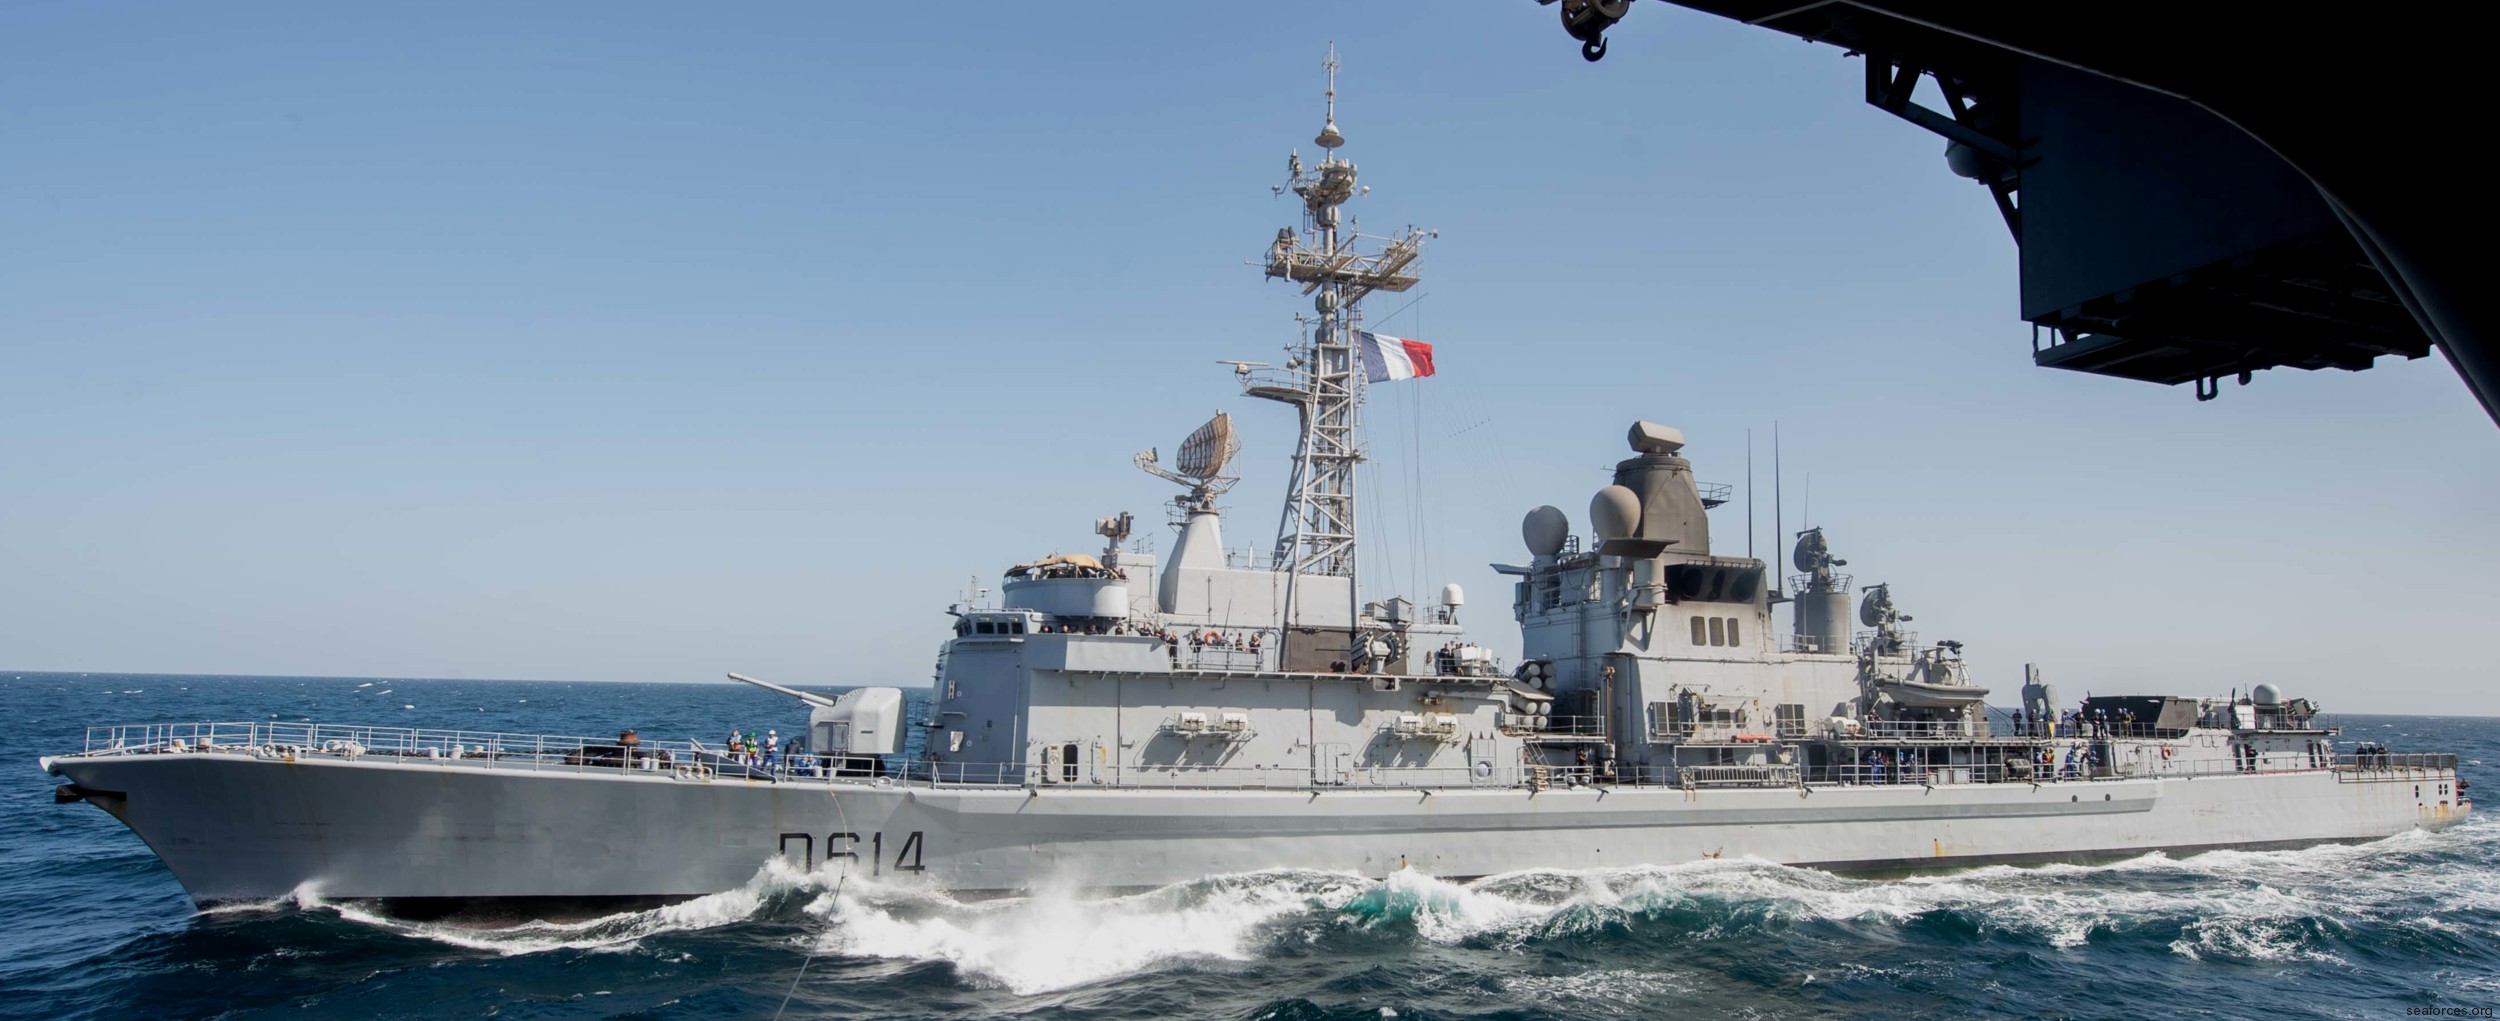 d-614 fs cassard f70aa class guided missile frigate ffgh ddg french navy marine nationale 23